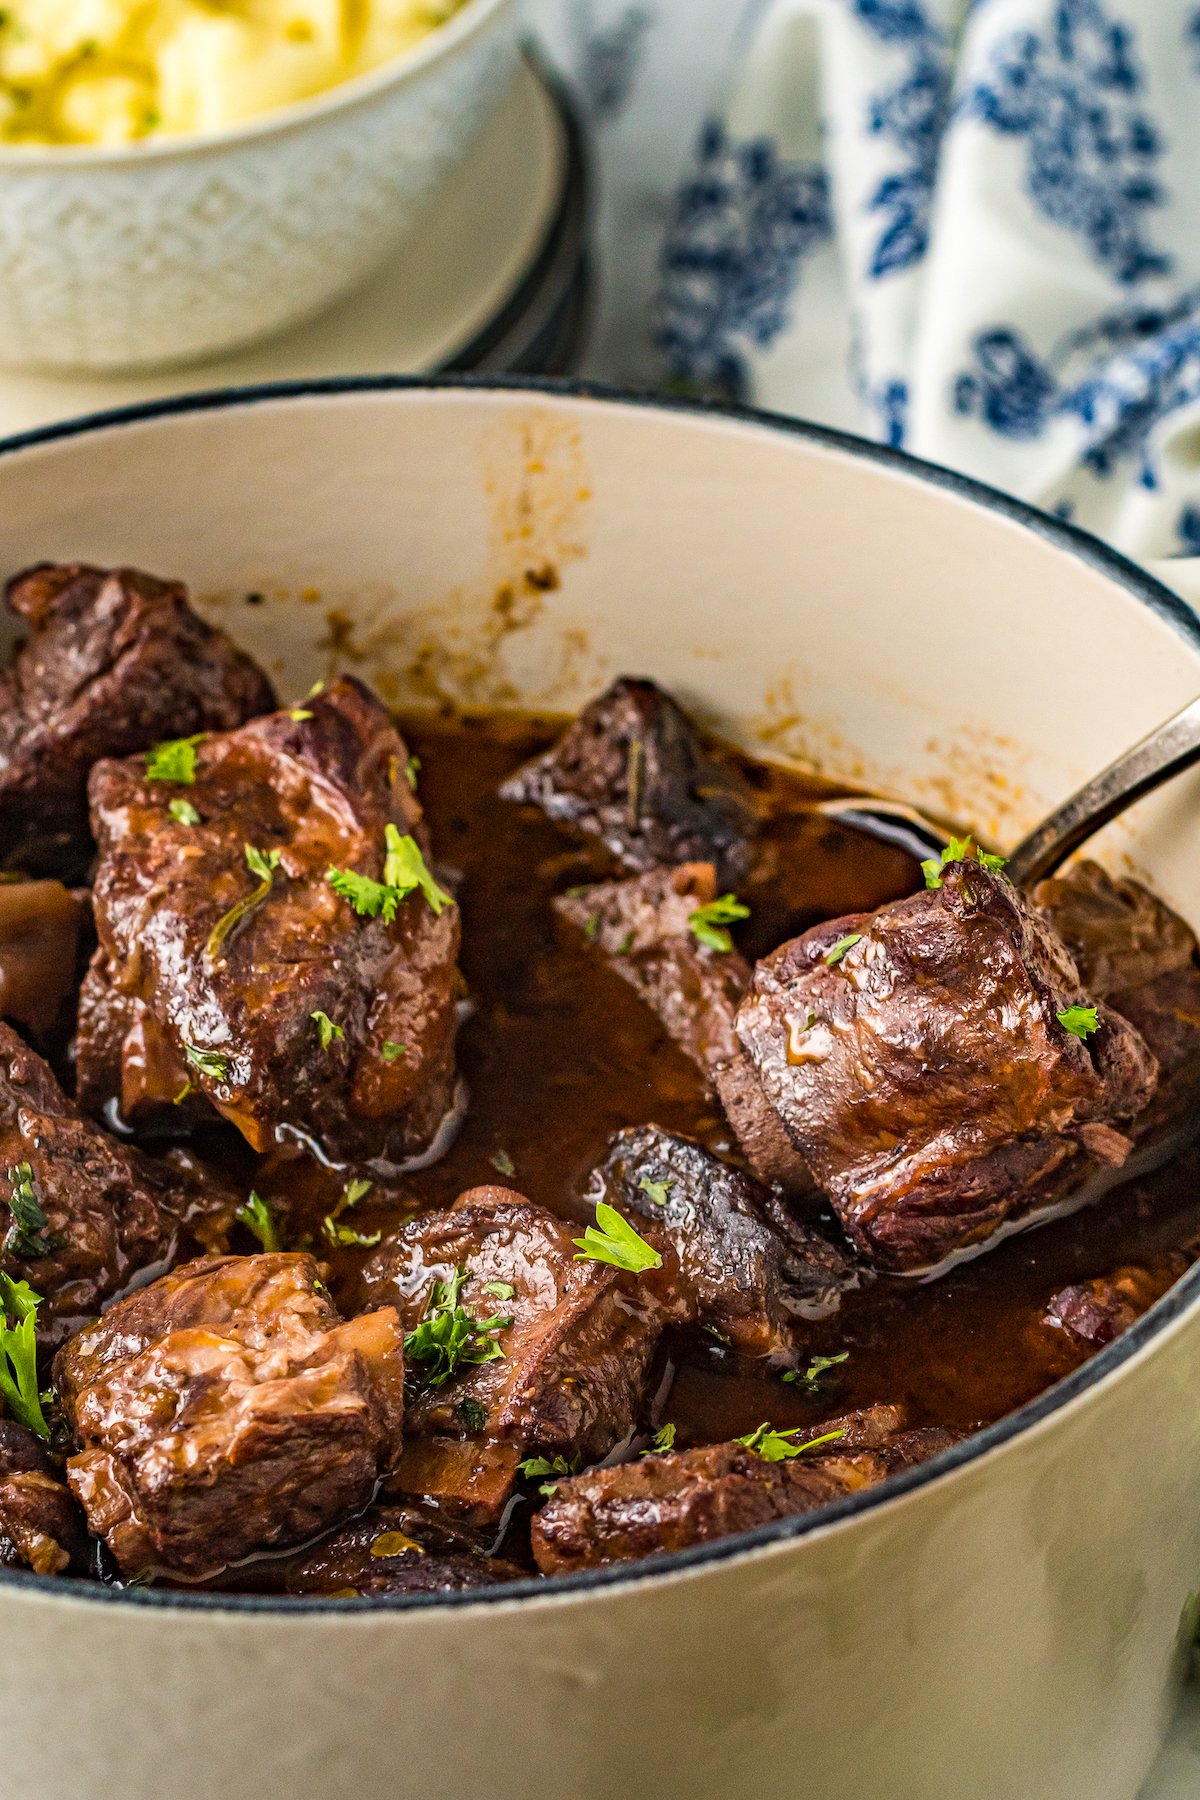 Braised short ribs in a Dutch oven with rich brown sauce. A spoon is lifting one piece of the short ribs out of the sauce.